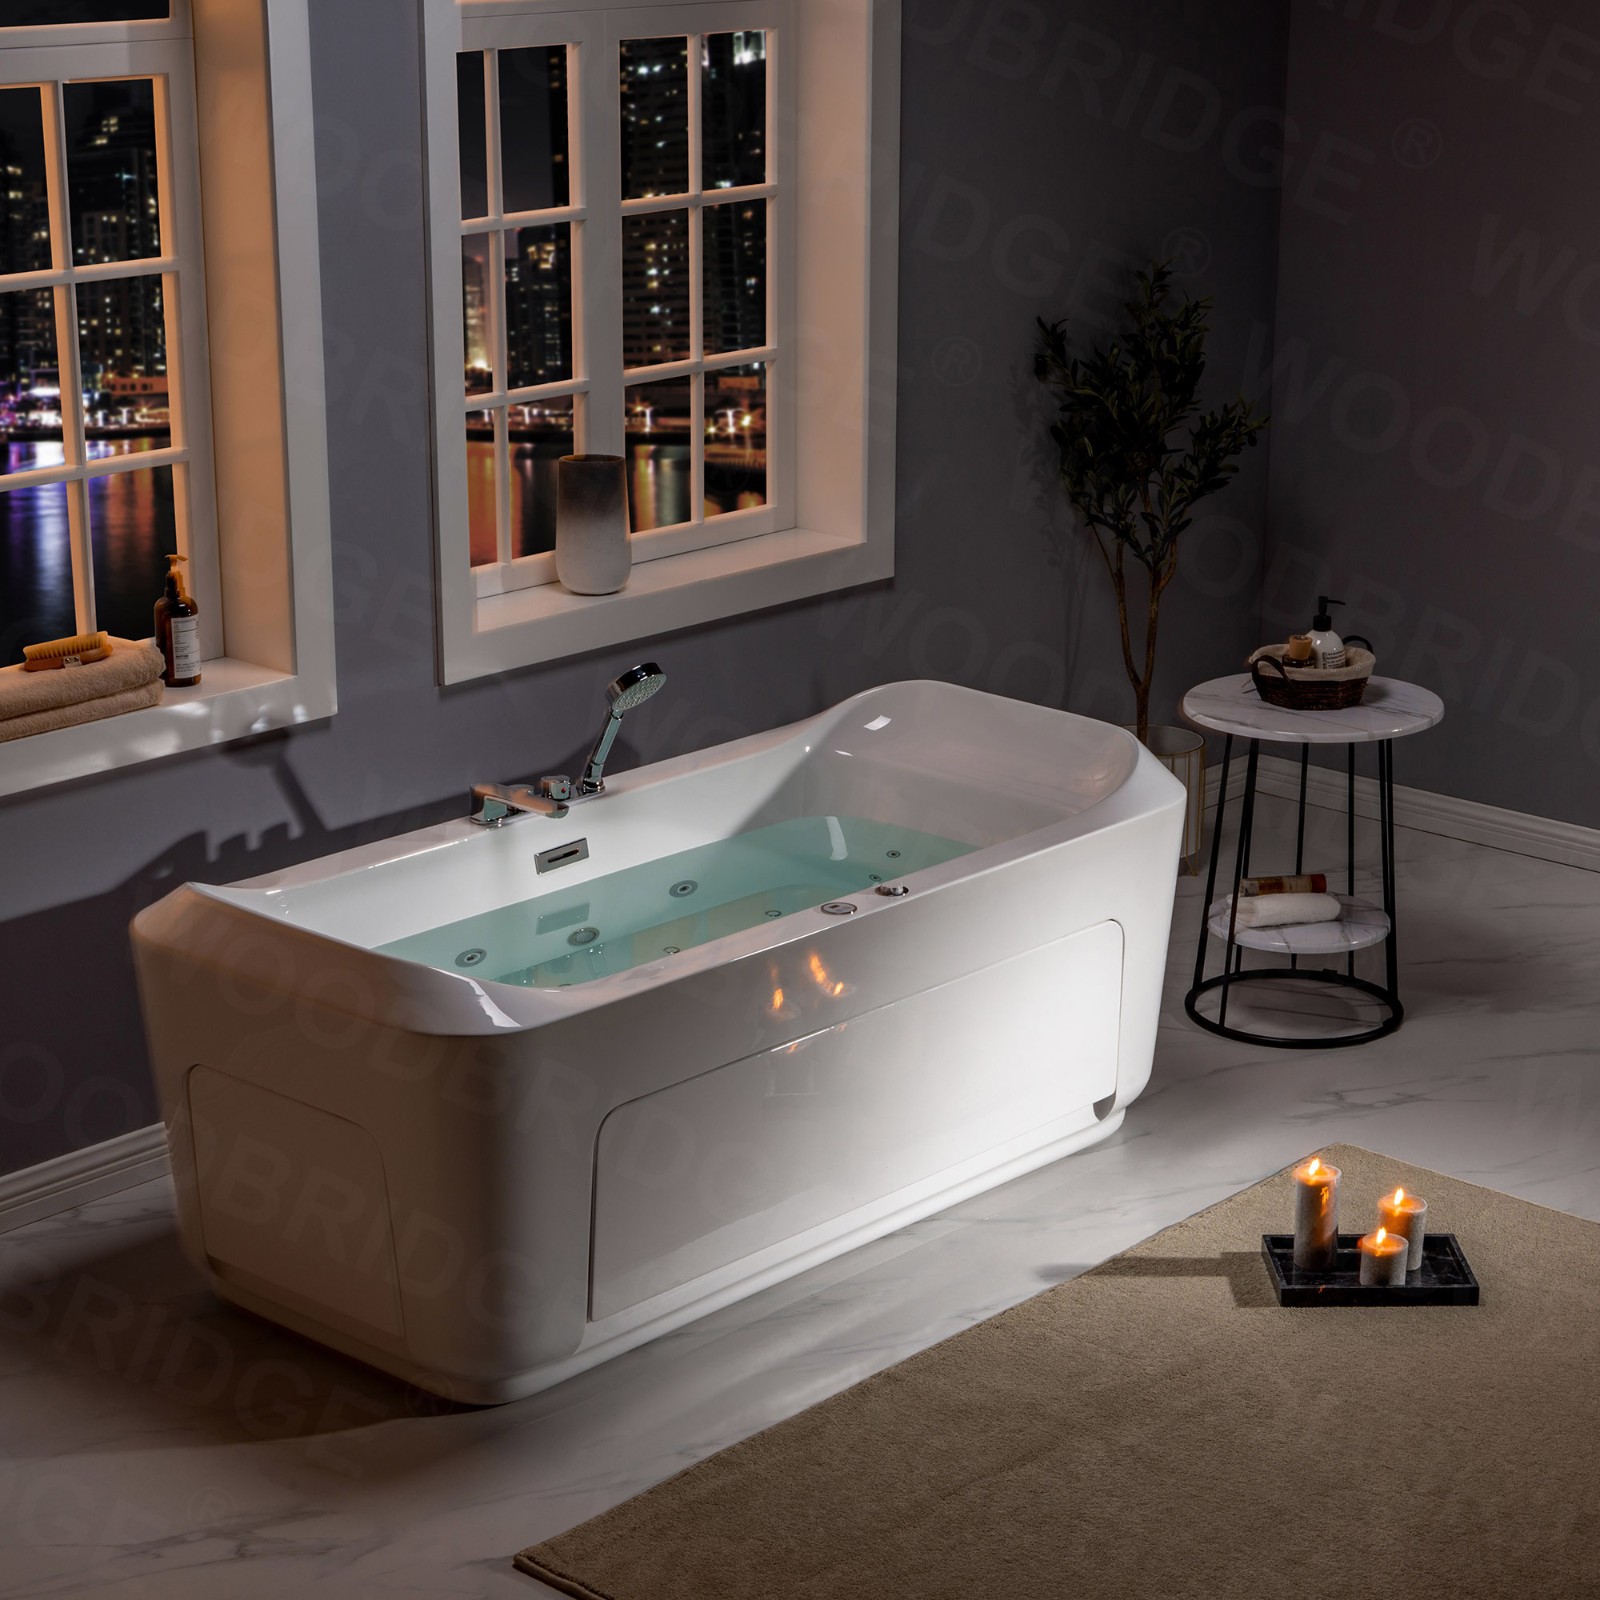  1 Person Freestanding Massage Hydrotherapy Bathtub Tub Hot Tub Spa, with Inline Heater. BTS-0092_9080